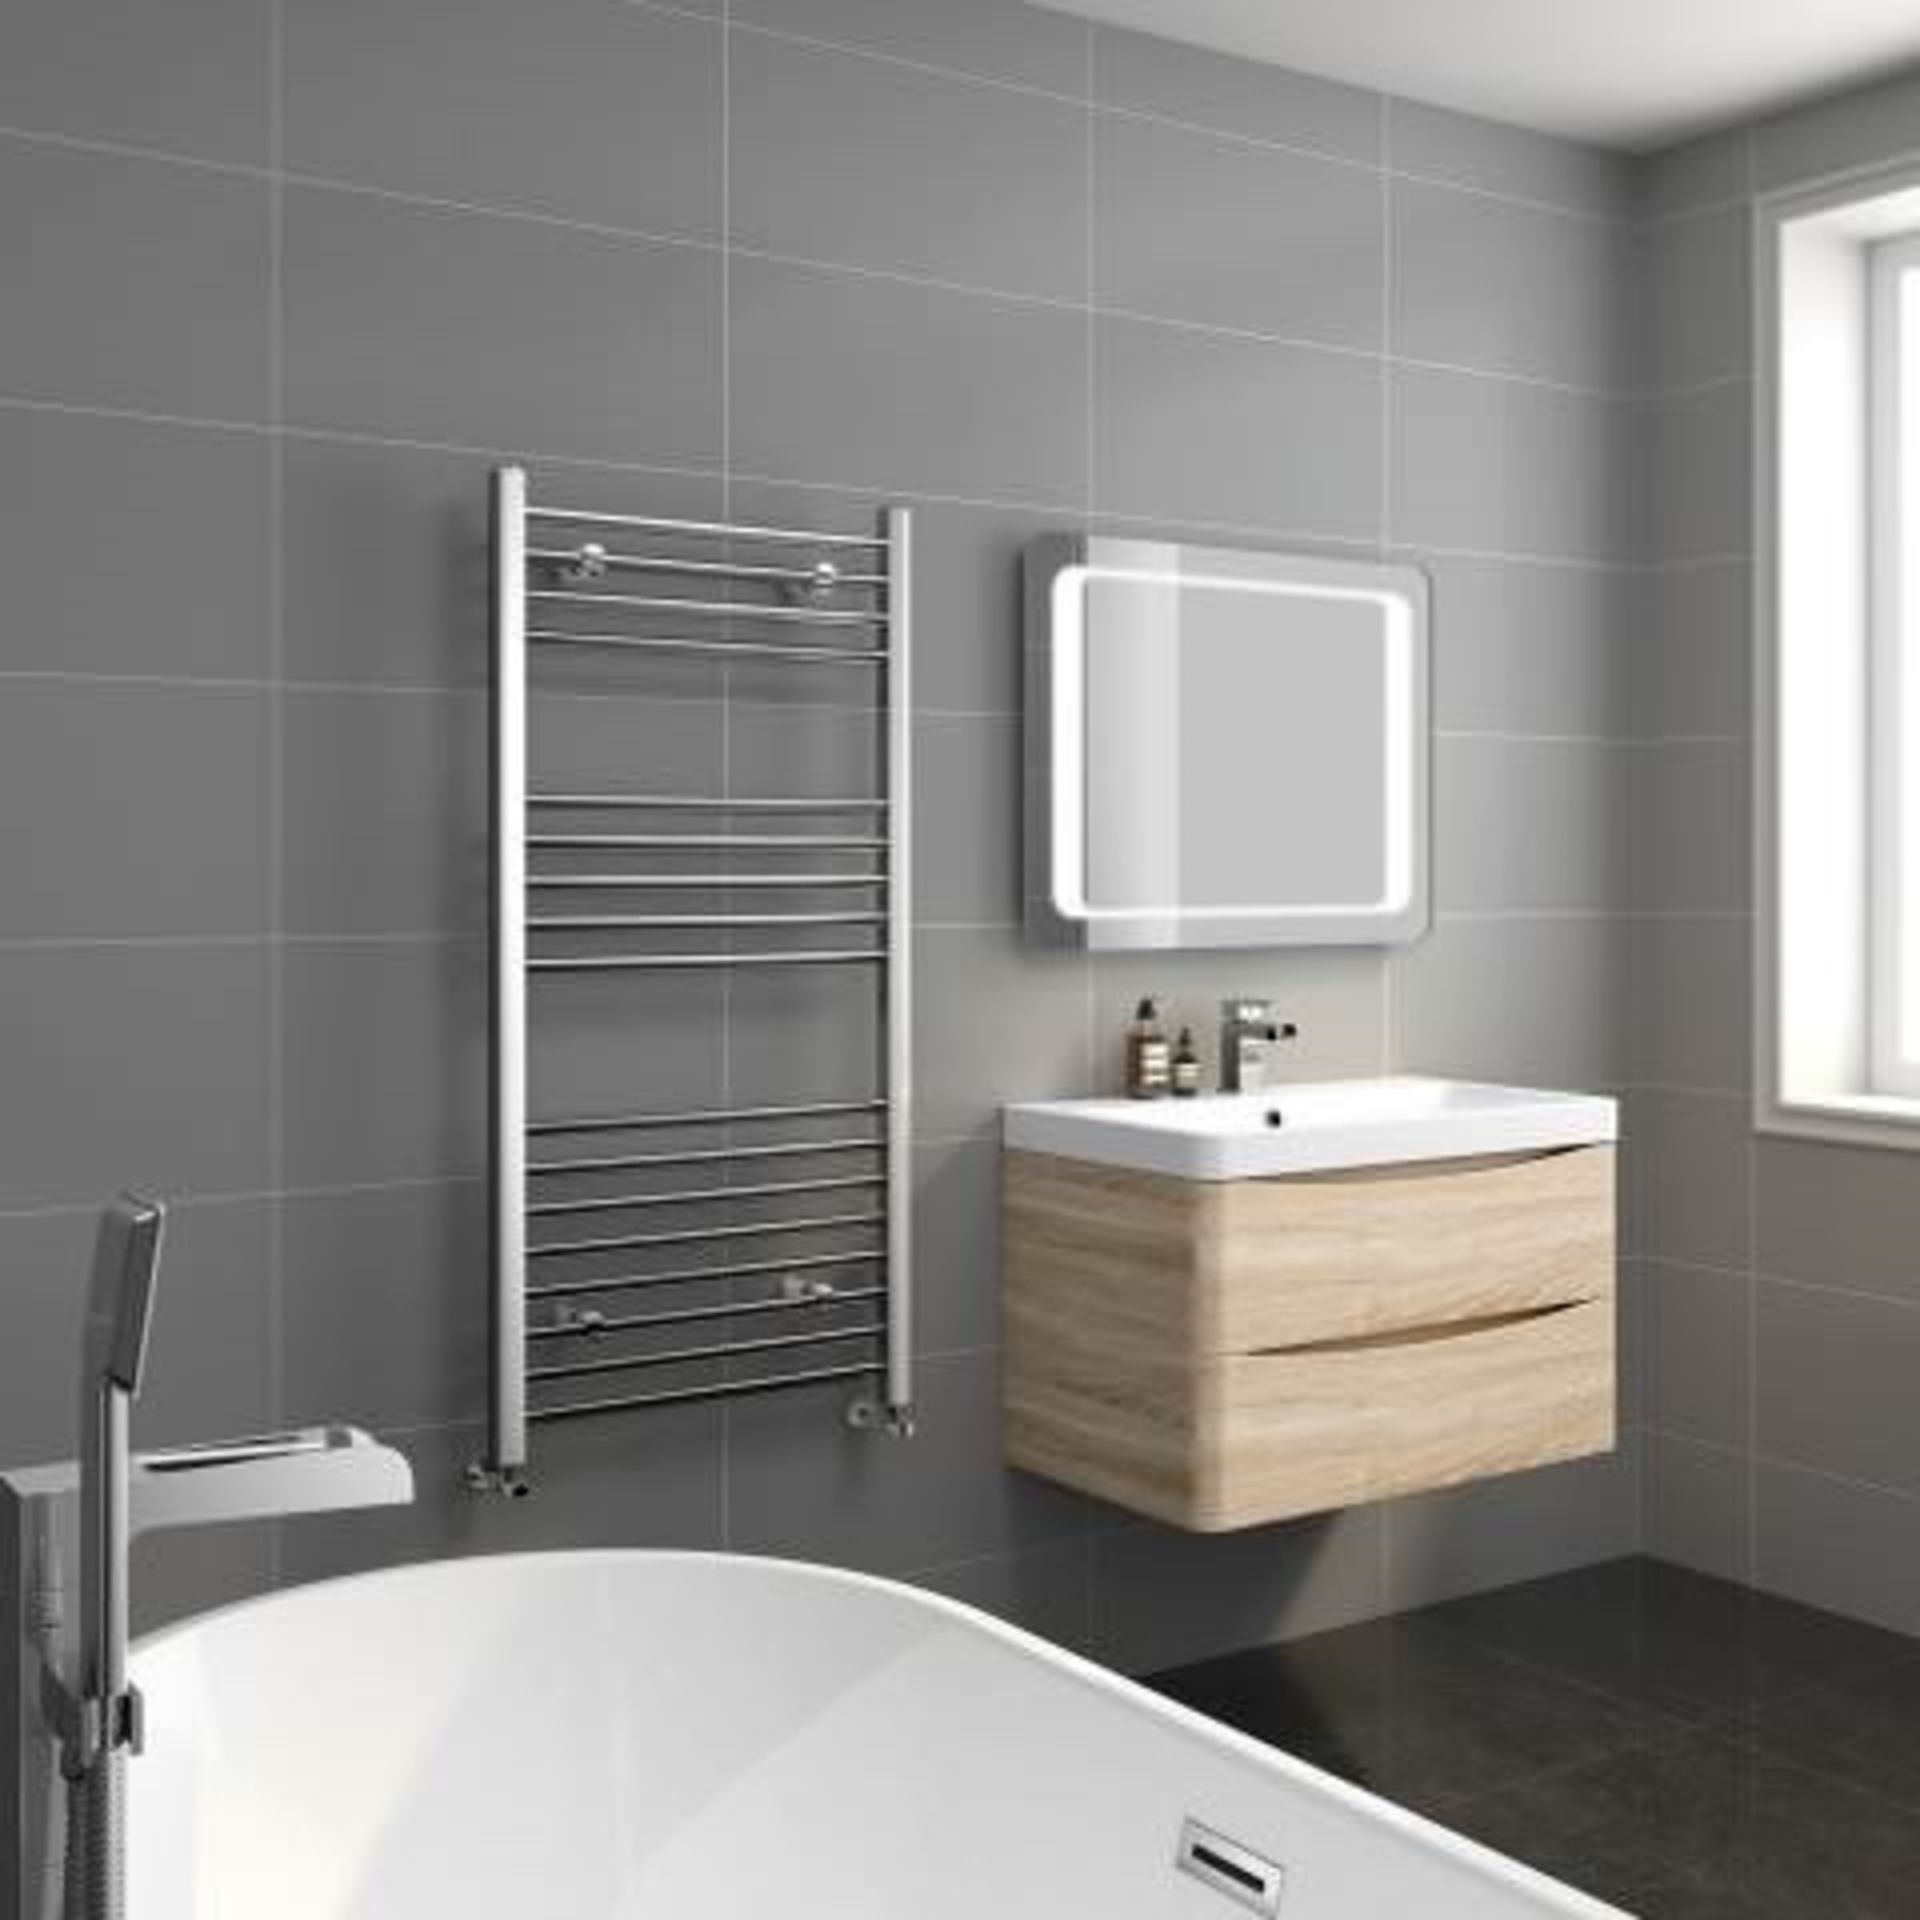 NEW & BOXED 1200x600mm - 20mm Tubes - Chrome Heated Straight Rail Ladder Towel Radiator.RRP £2... - Image 2 of 2